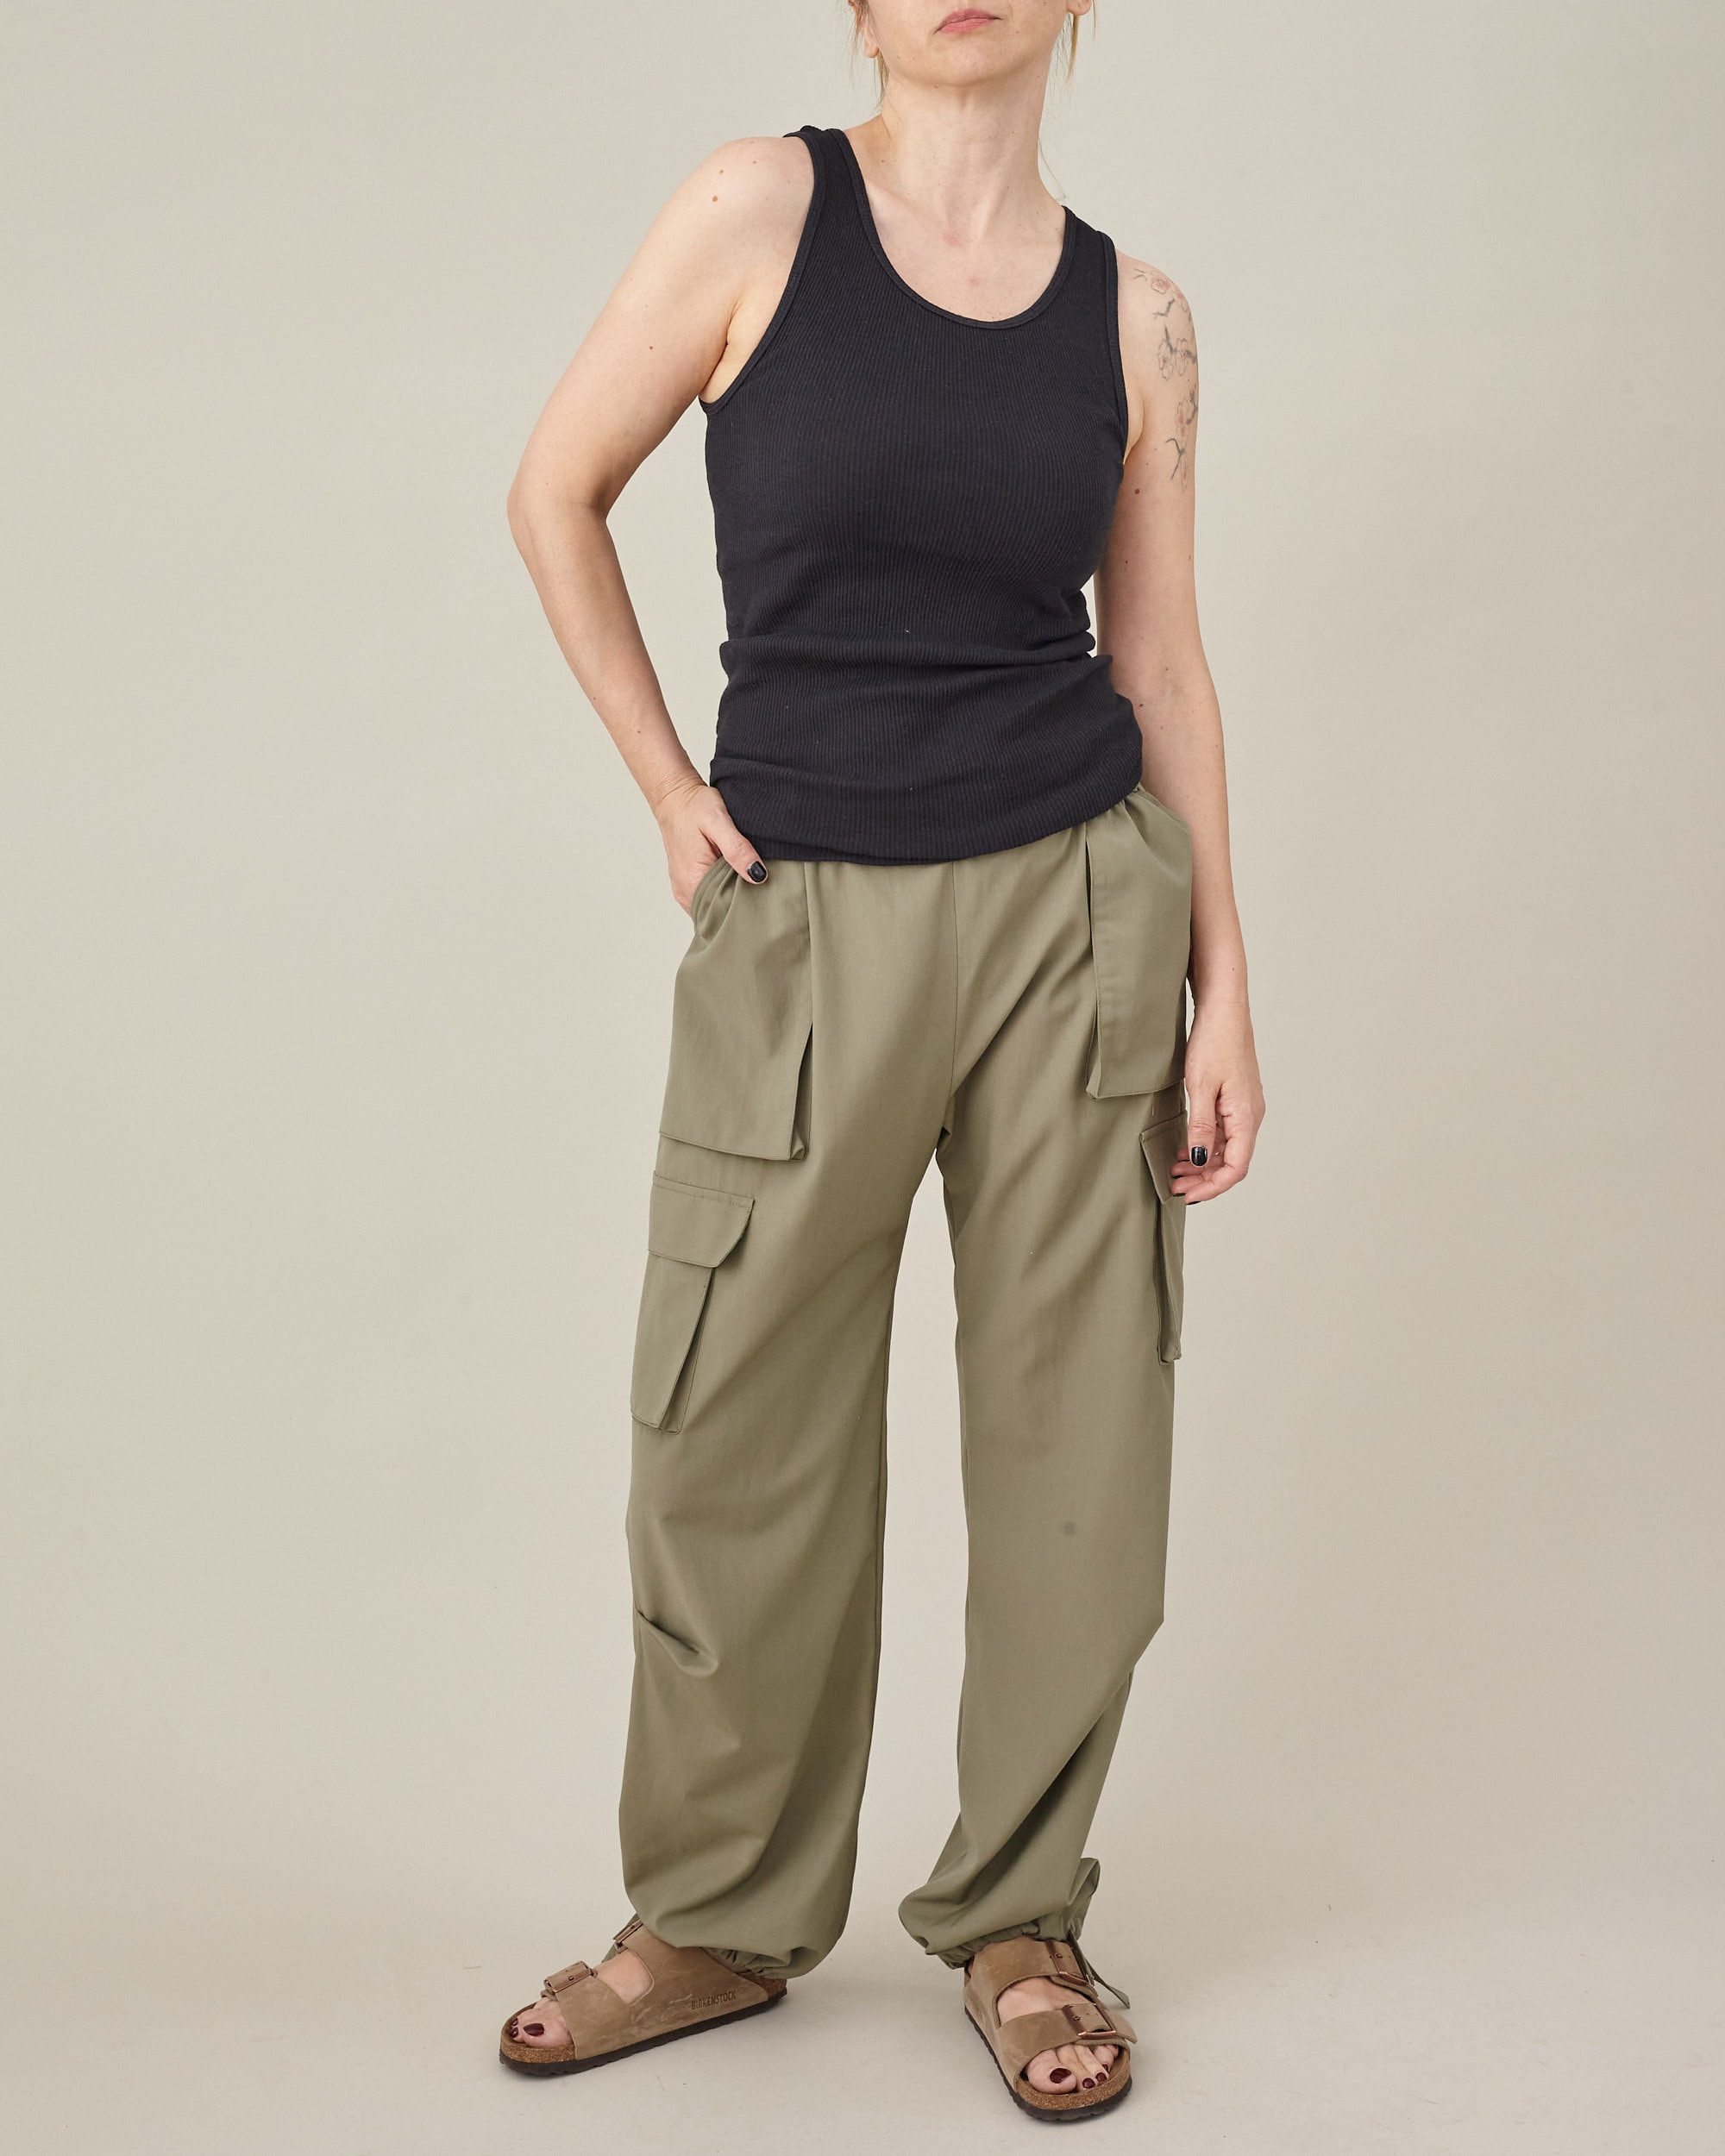 Cargo Pants for Women, Modern Baggy Pants With Elastic Back Waist, Toggle  Bottom With Drawstring and Loose Fit, More Colors FTN95_47WOL_COT 